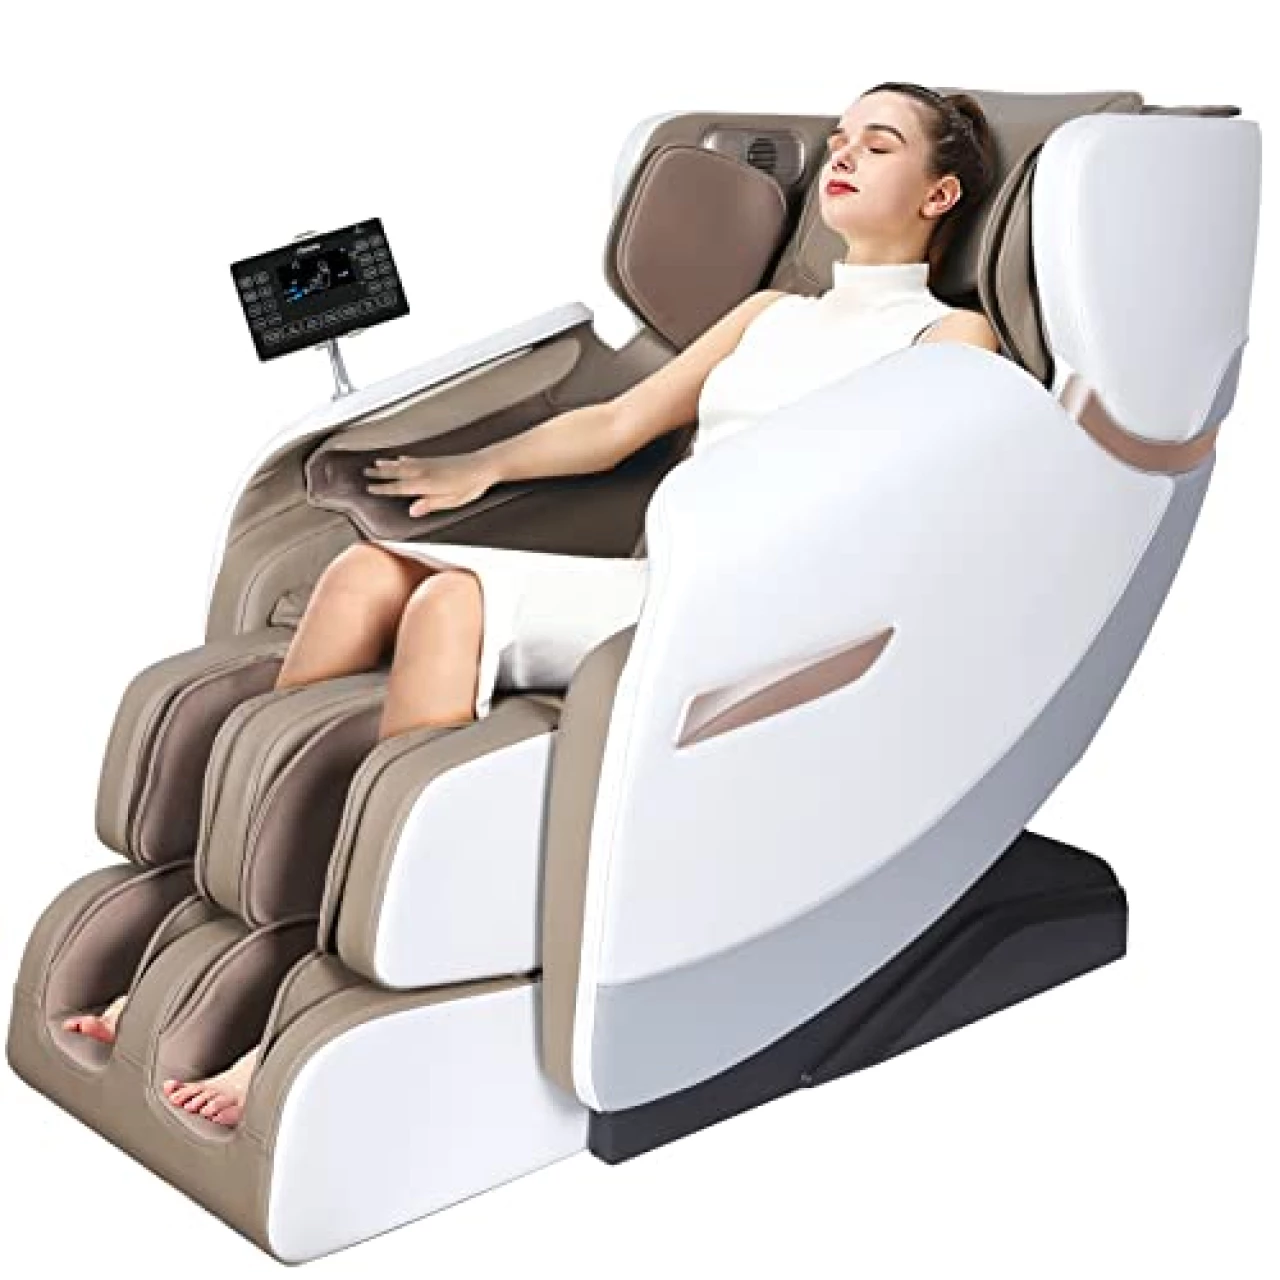 Massage Chair, 2023 Full Body Zero Gravity Massage Chairs, Shiatsu Massage Recliner Chair with Dual-core S Track, Airbags,Heating Therapy, Foot Rollers,Bluetooth Speaker